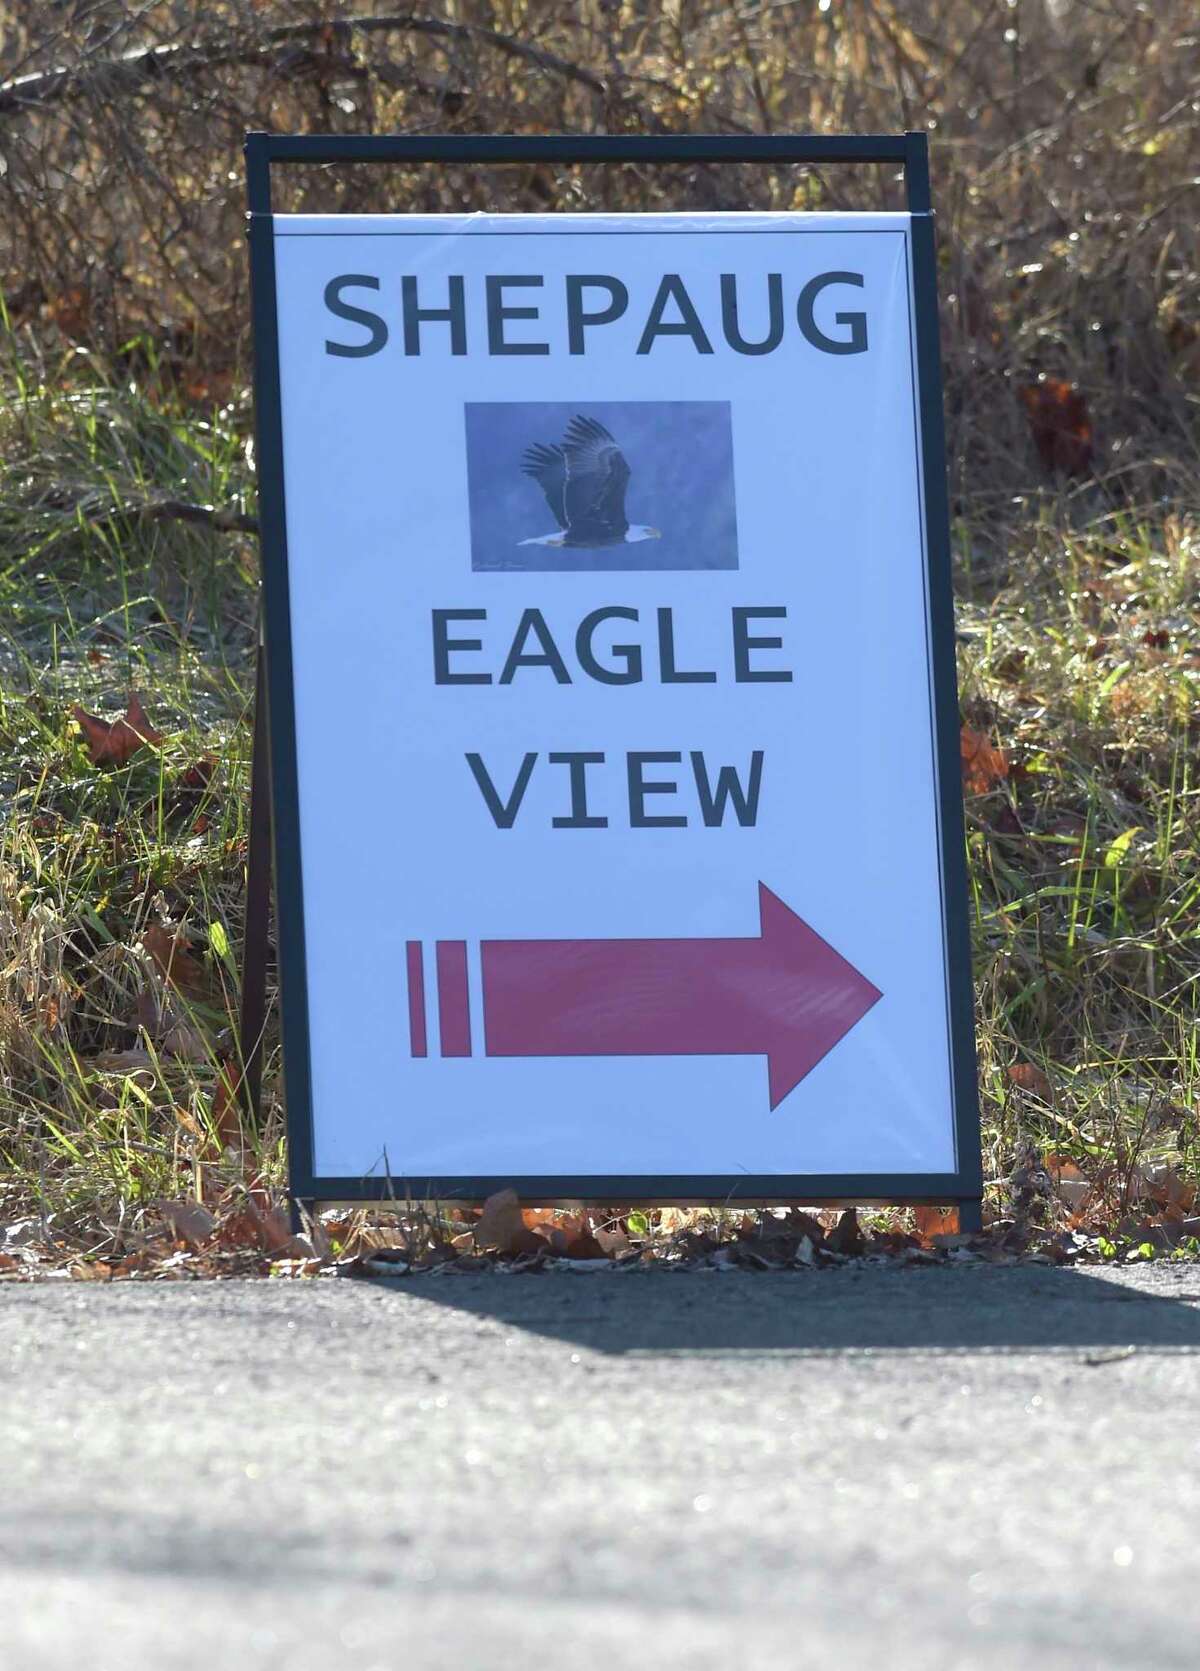 The Shepaug Eagle Observatory is now open for its 38th season, offering residents a unique opportunity to view bald eagles in their natural habitat. The observatory is run by FirstLight, which owns and operates the Shepaug Hydro Generating Station in Southbury. Eagles, hawks and all types of birds of prey flock to the area to feed on aquatic life in the moving waters below the Shepaug Dam. As many as 10 eagles have been seen in a day, with a record of 32 in one day last season. The observatory opened for the new season on Saturday, Dec. 23, and it will be open from 9 a.m. to 1 p.m. Wednesdays, Saturdays and Sundays. 